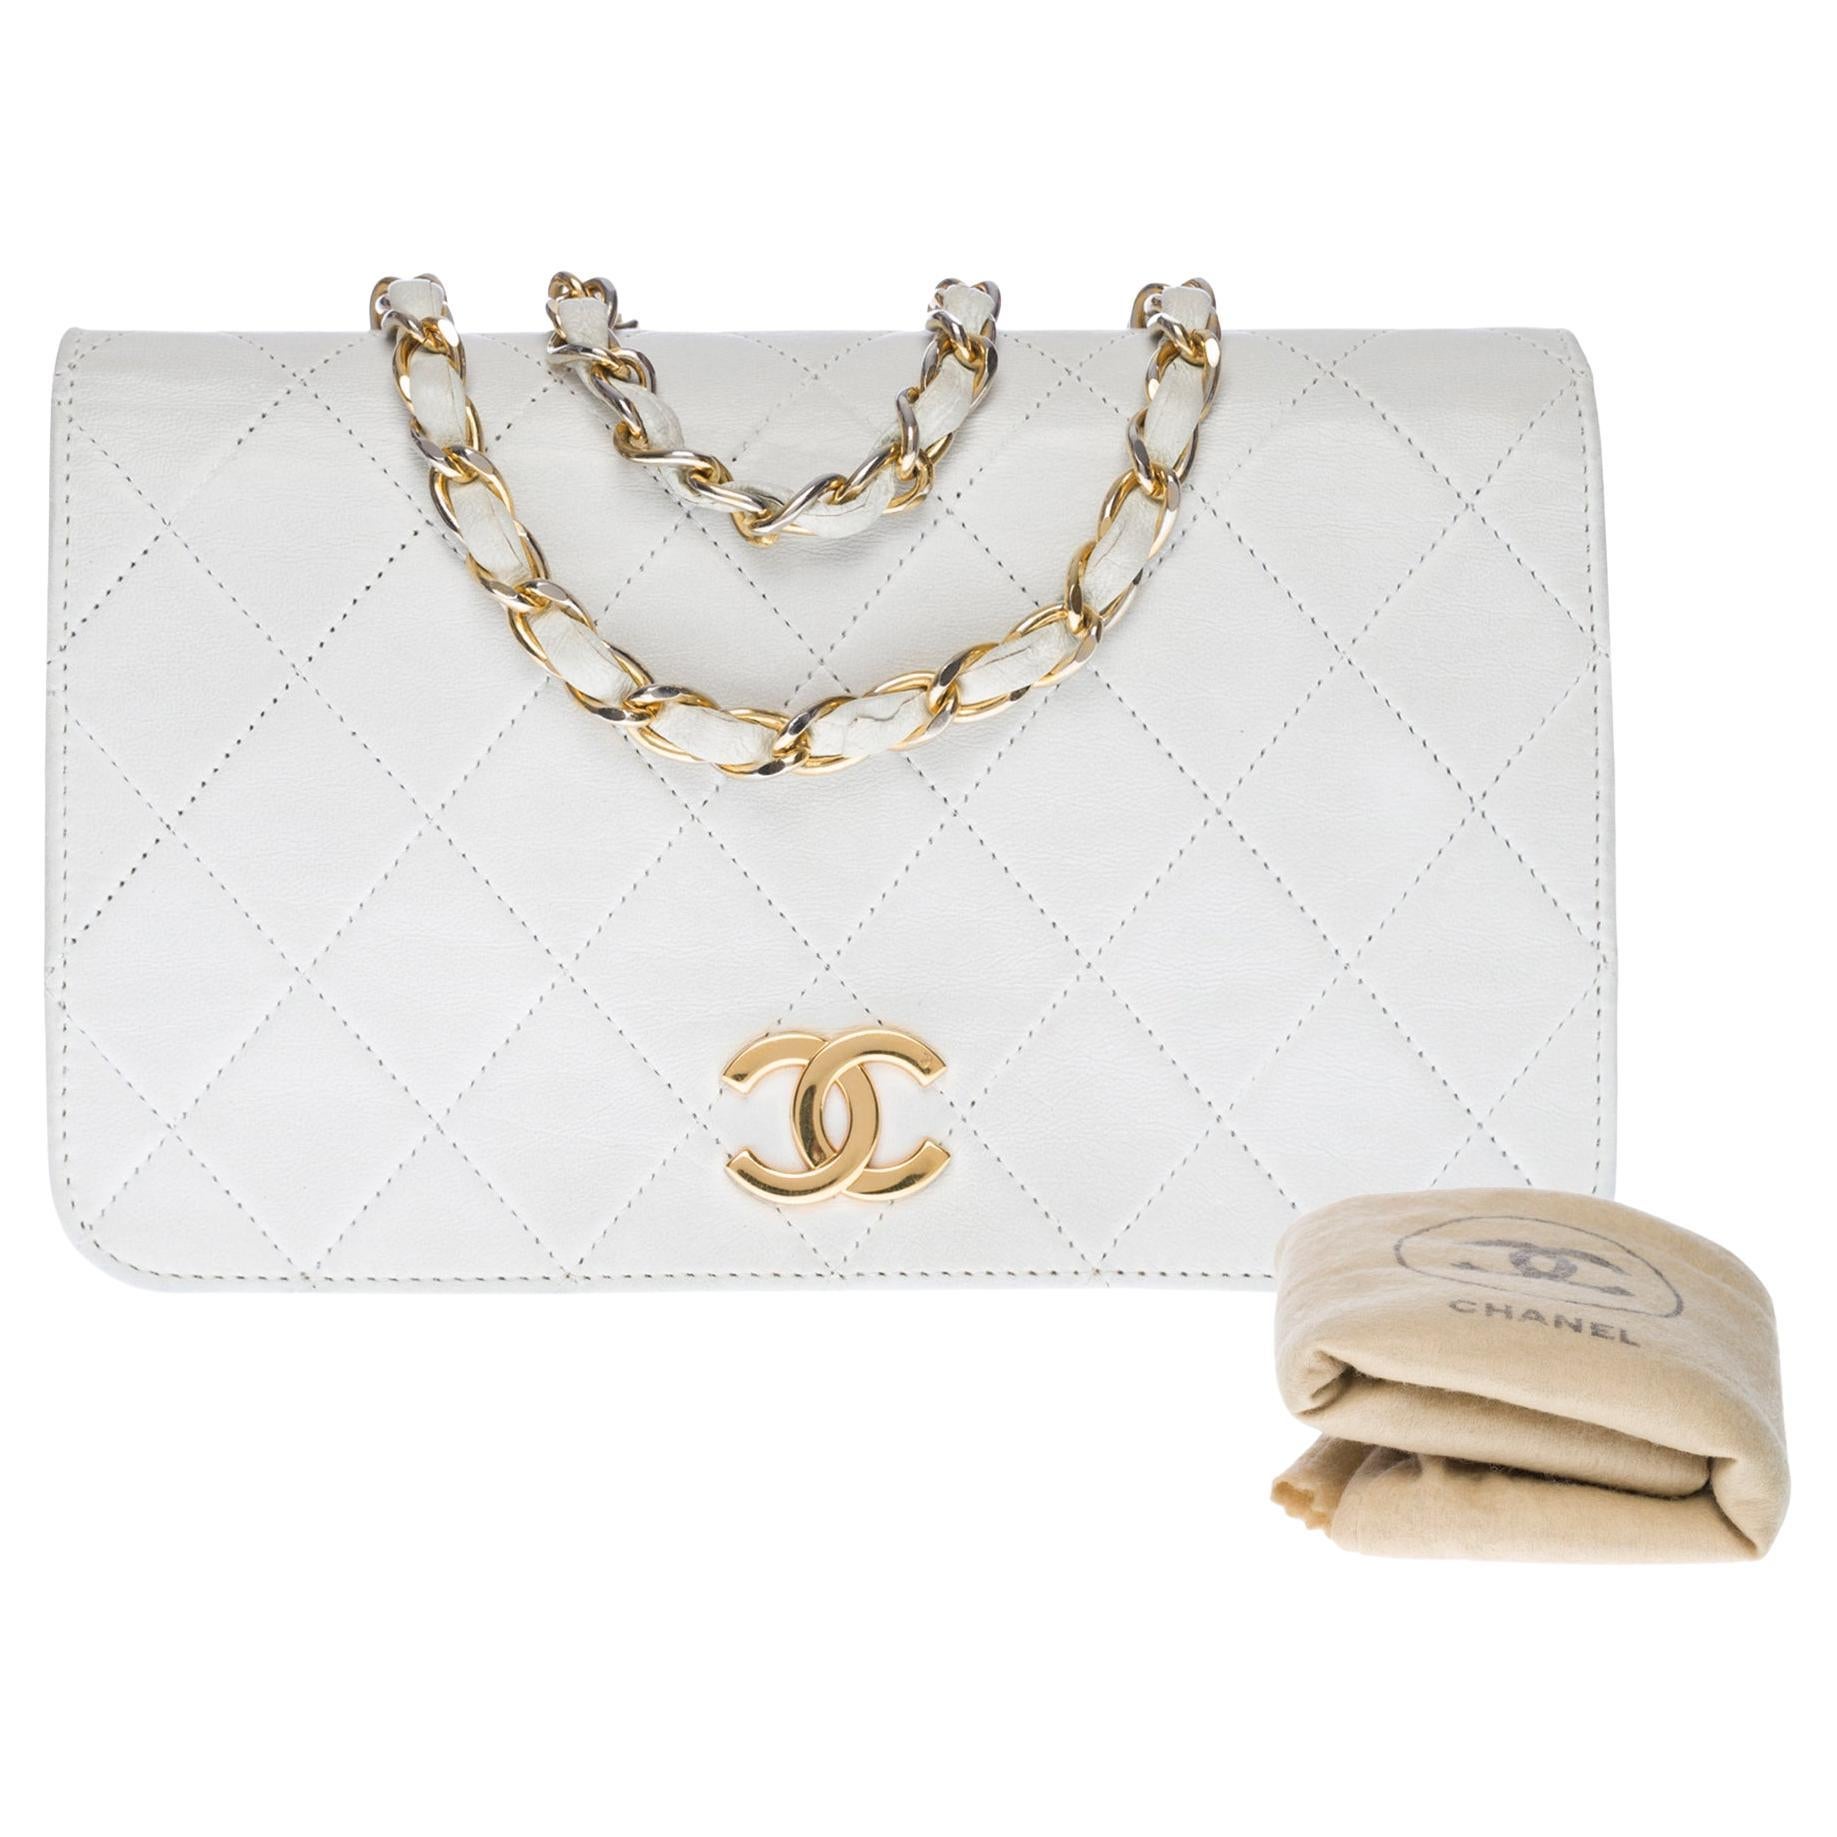 Chanel Full flap Mini shoulder bag in white quilted lambskin, GHW